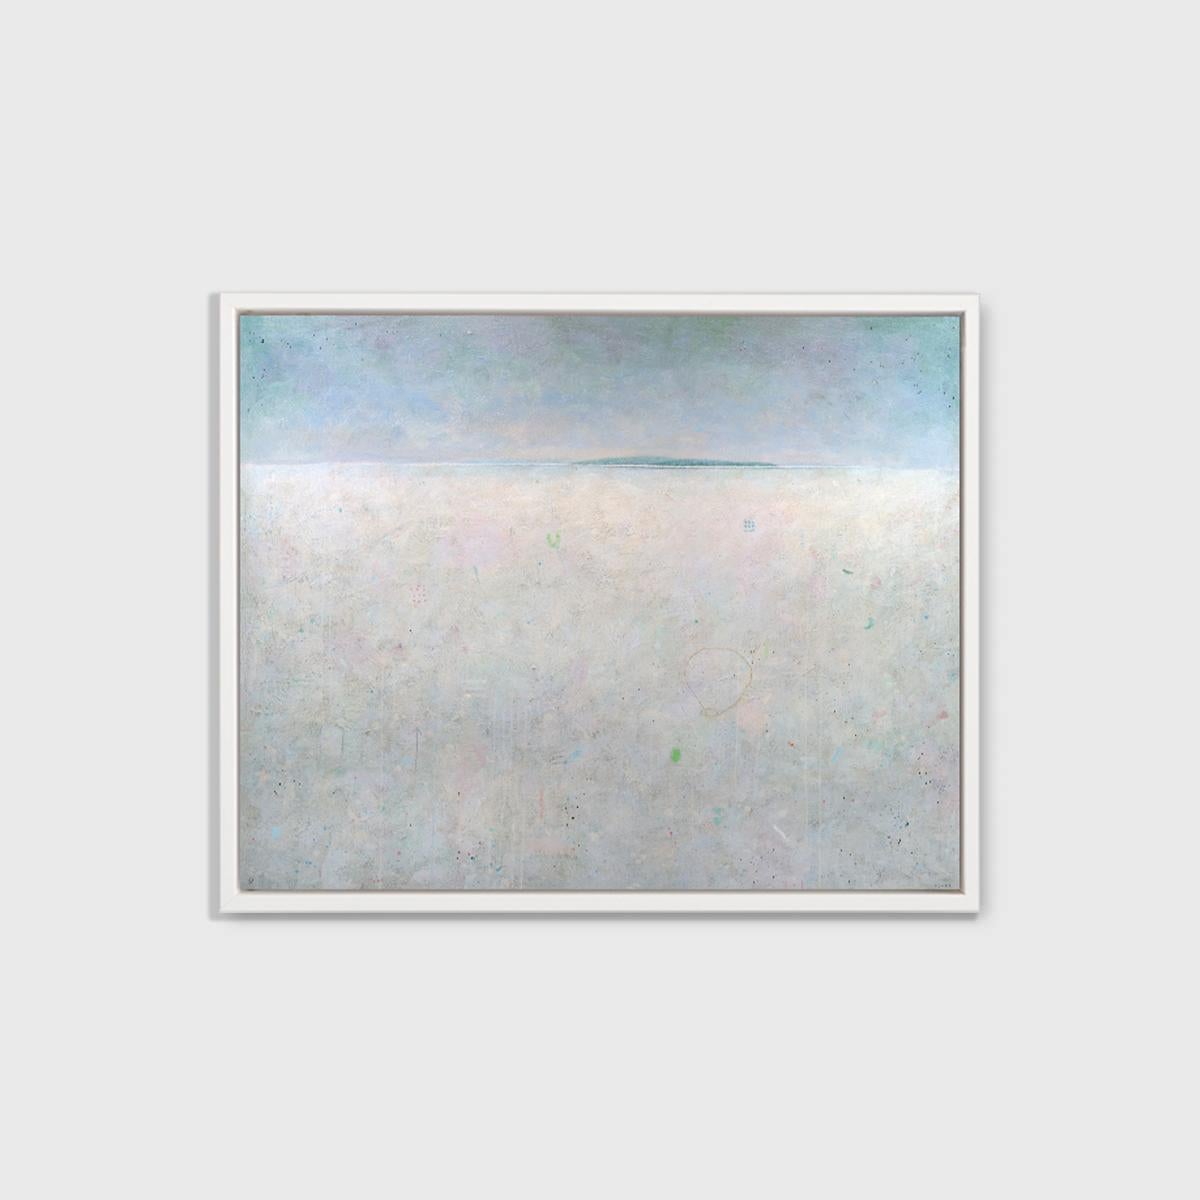 This abstract landscape limited edition print by Elwood Howell features a high horizon line, separating a pale, nearly grey foreground and a blue gradient sky. Along the horizon line, a thin blue stretch of what appears to be a small island is